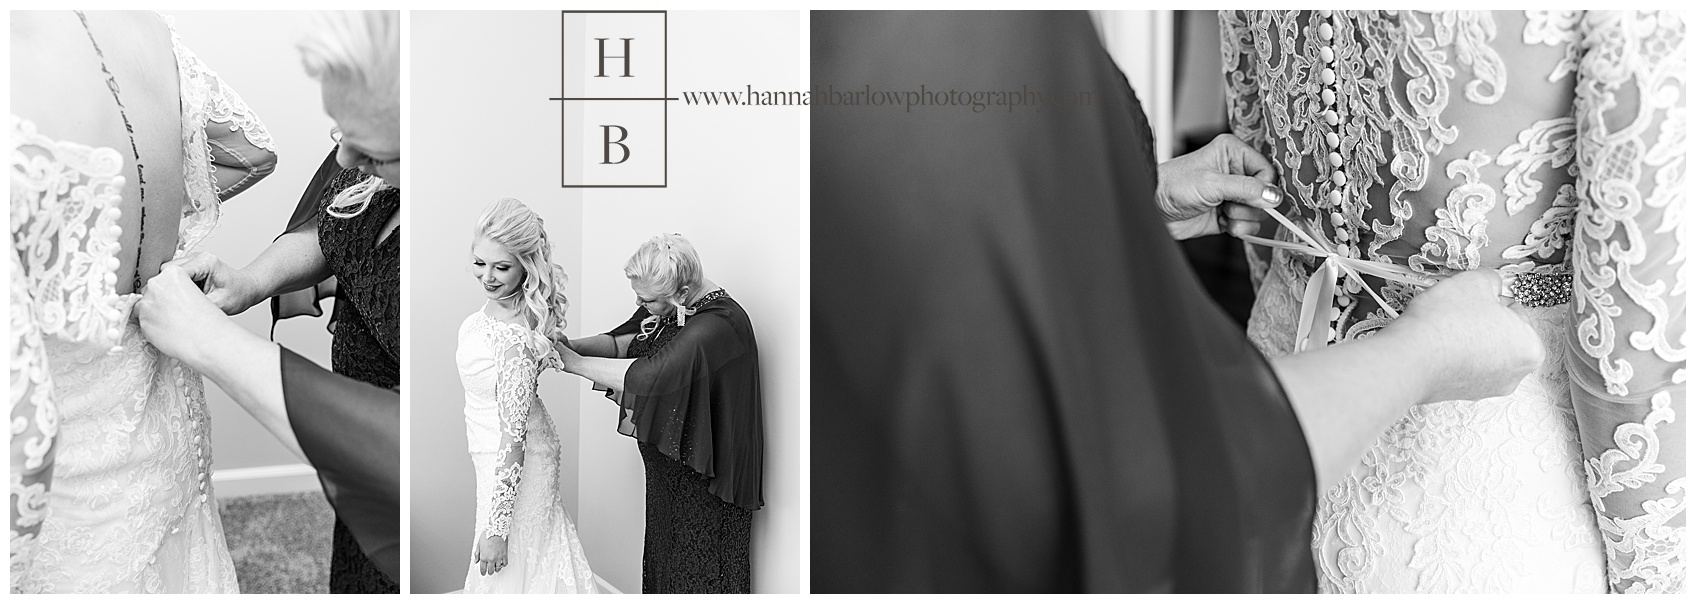 Black and White Photos of Bride Getting Dress Buttoned